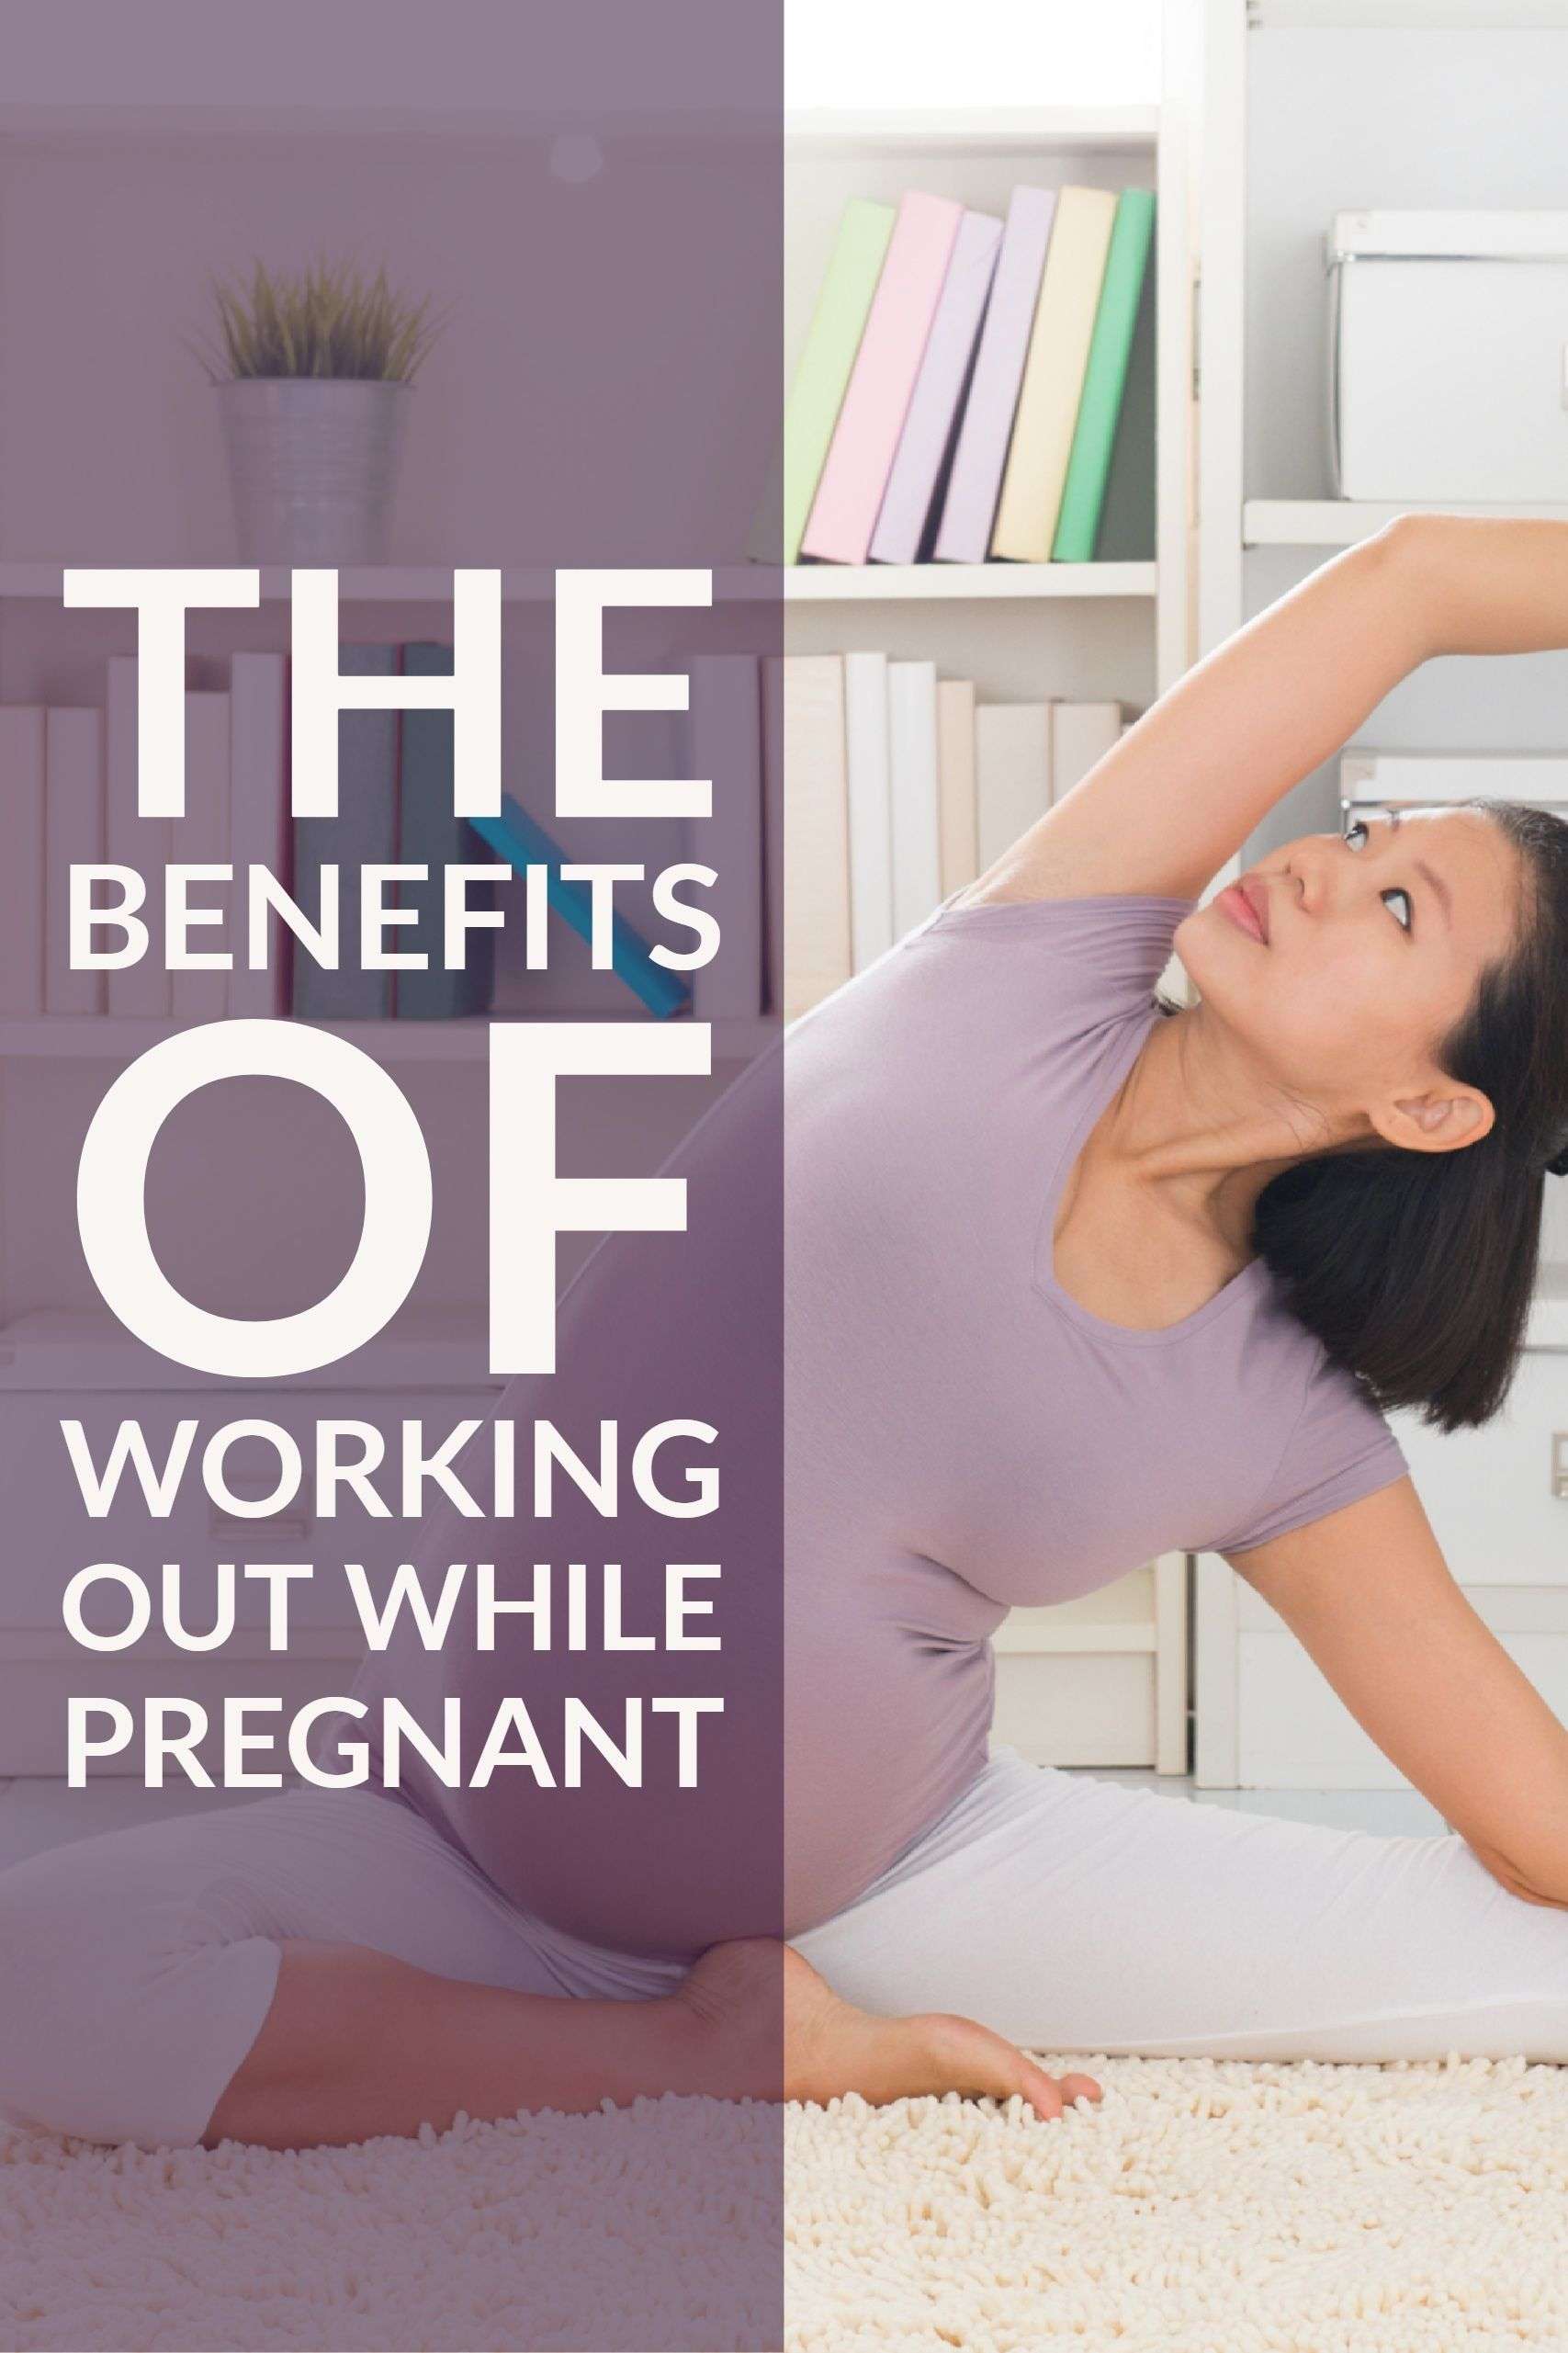 What Benefits Can I Claim While Pregnant And Working